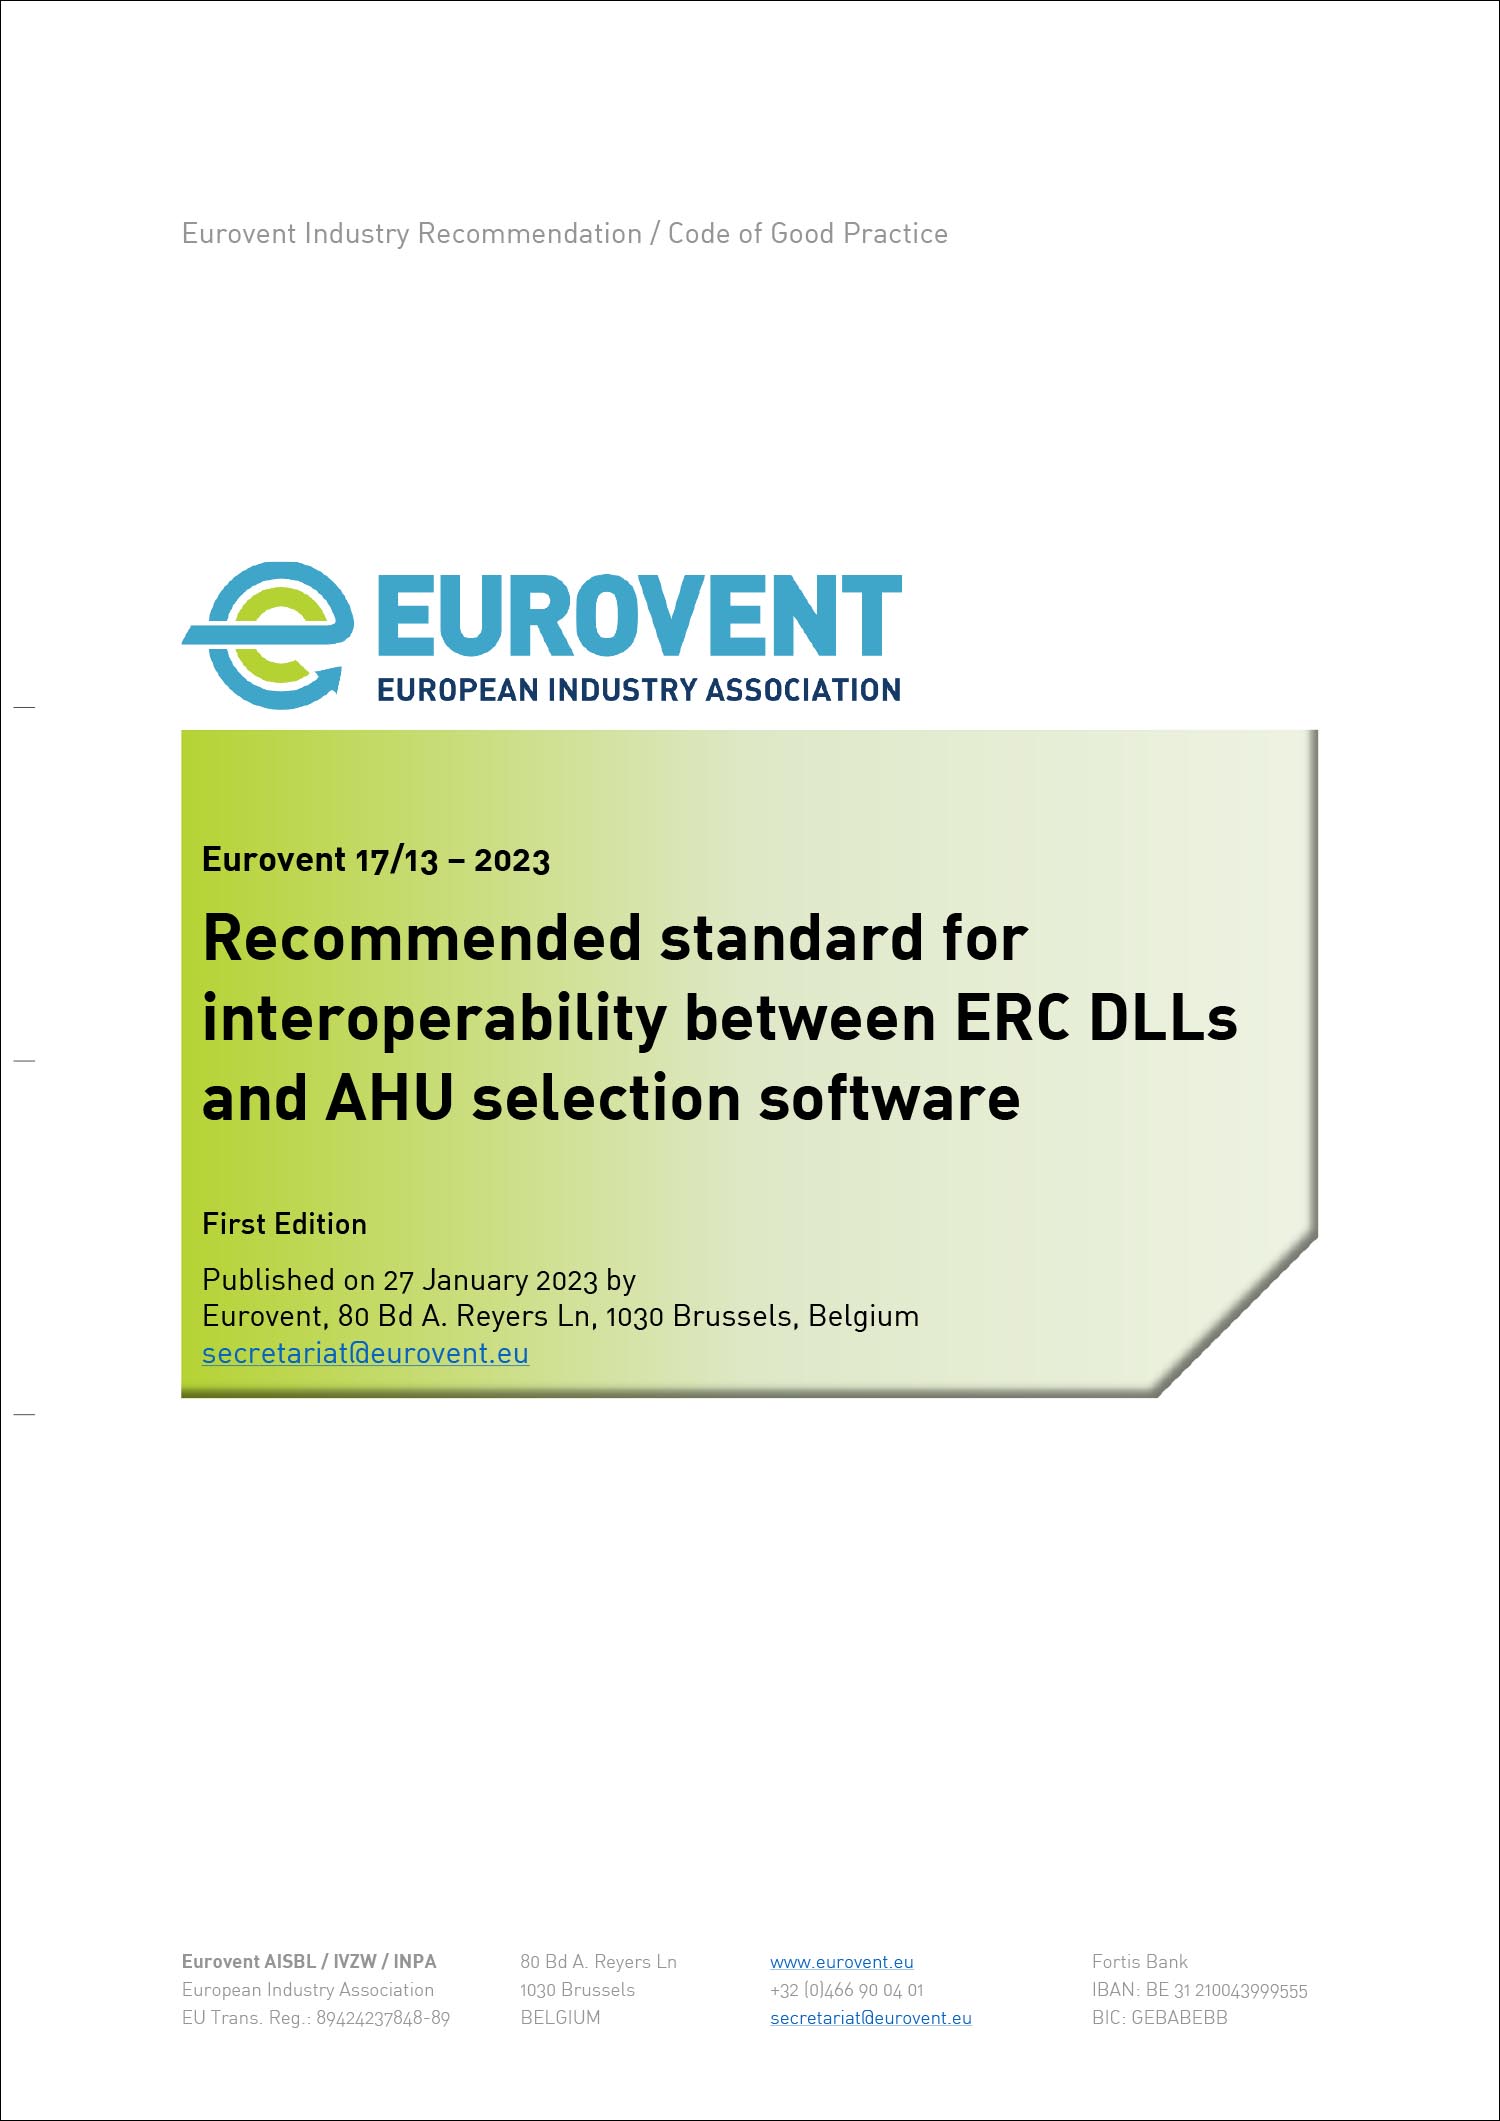 Eurovent 17/13 - 2023: Recommended standard for interoperability between ERC DLLs and AHU selection software - First Edition